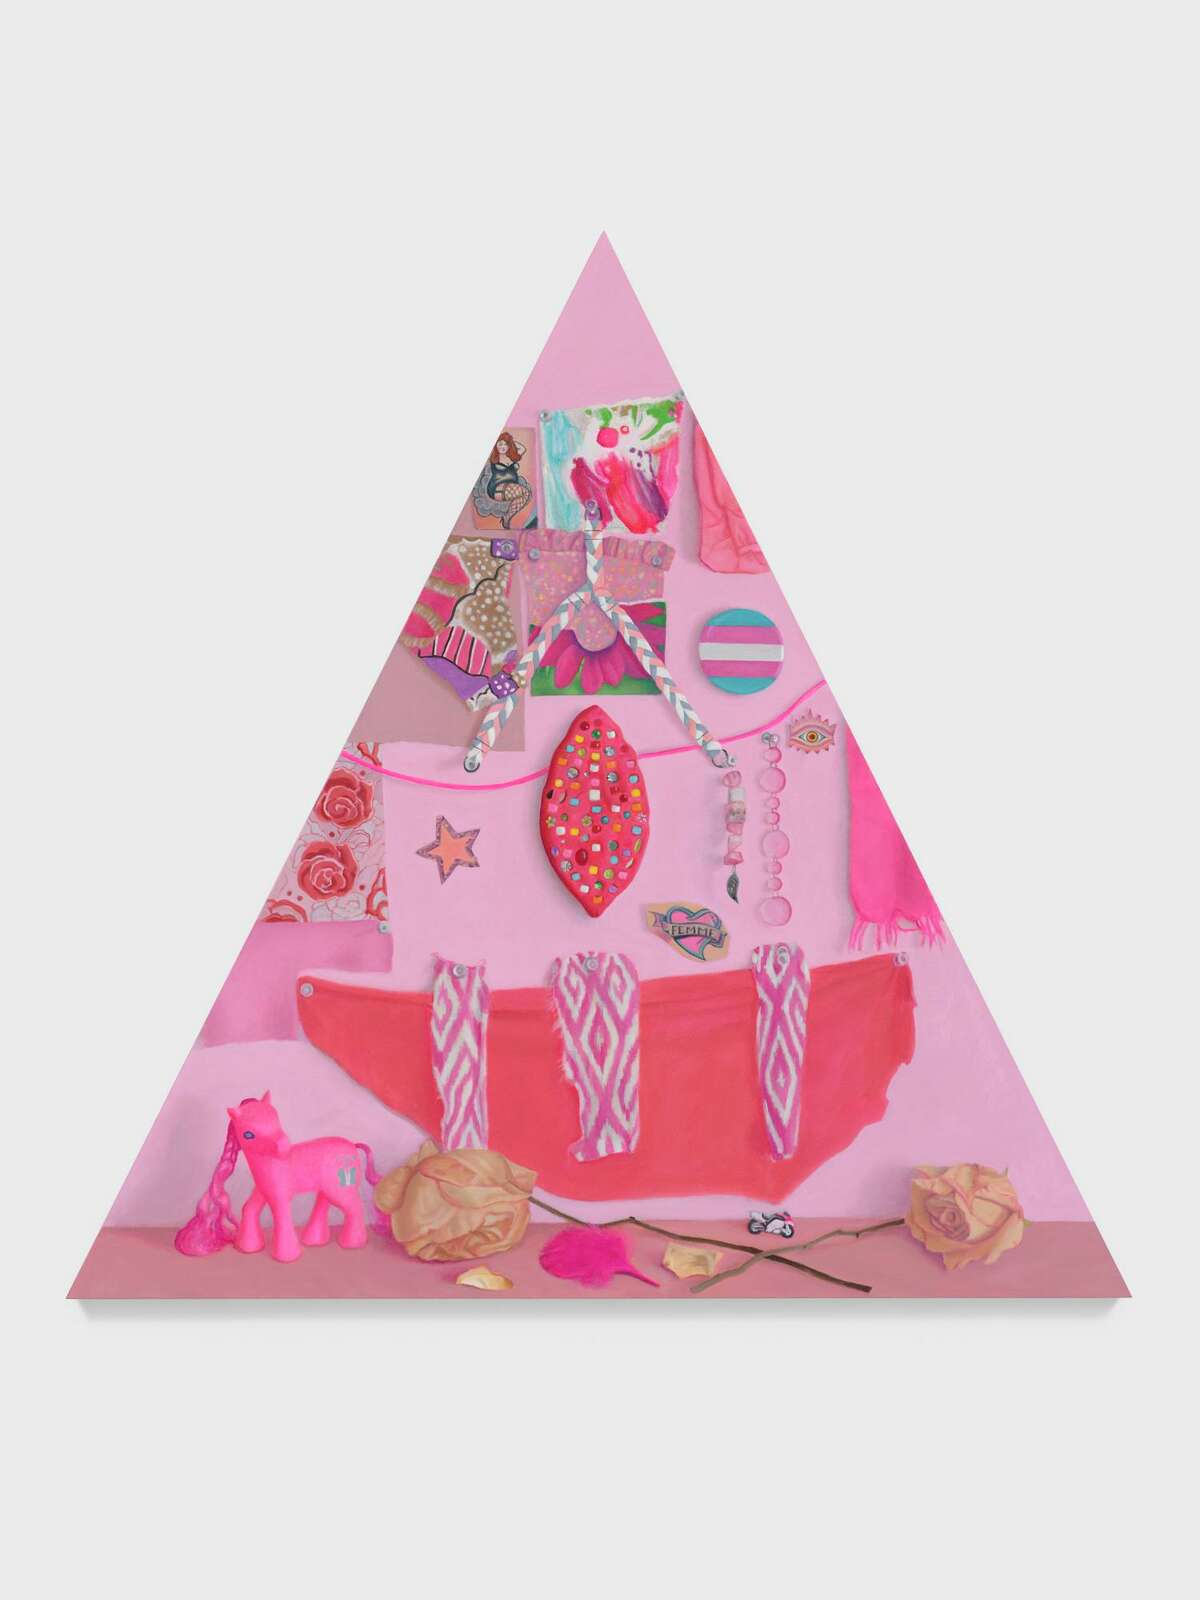 "Altar for Femme Joy" is on display at the Aldrich Contemporary Art Museum through Sept. 6.